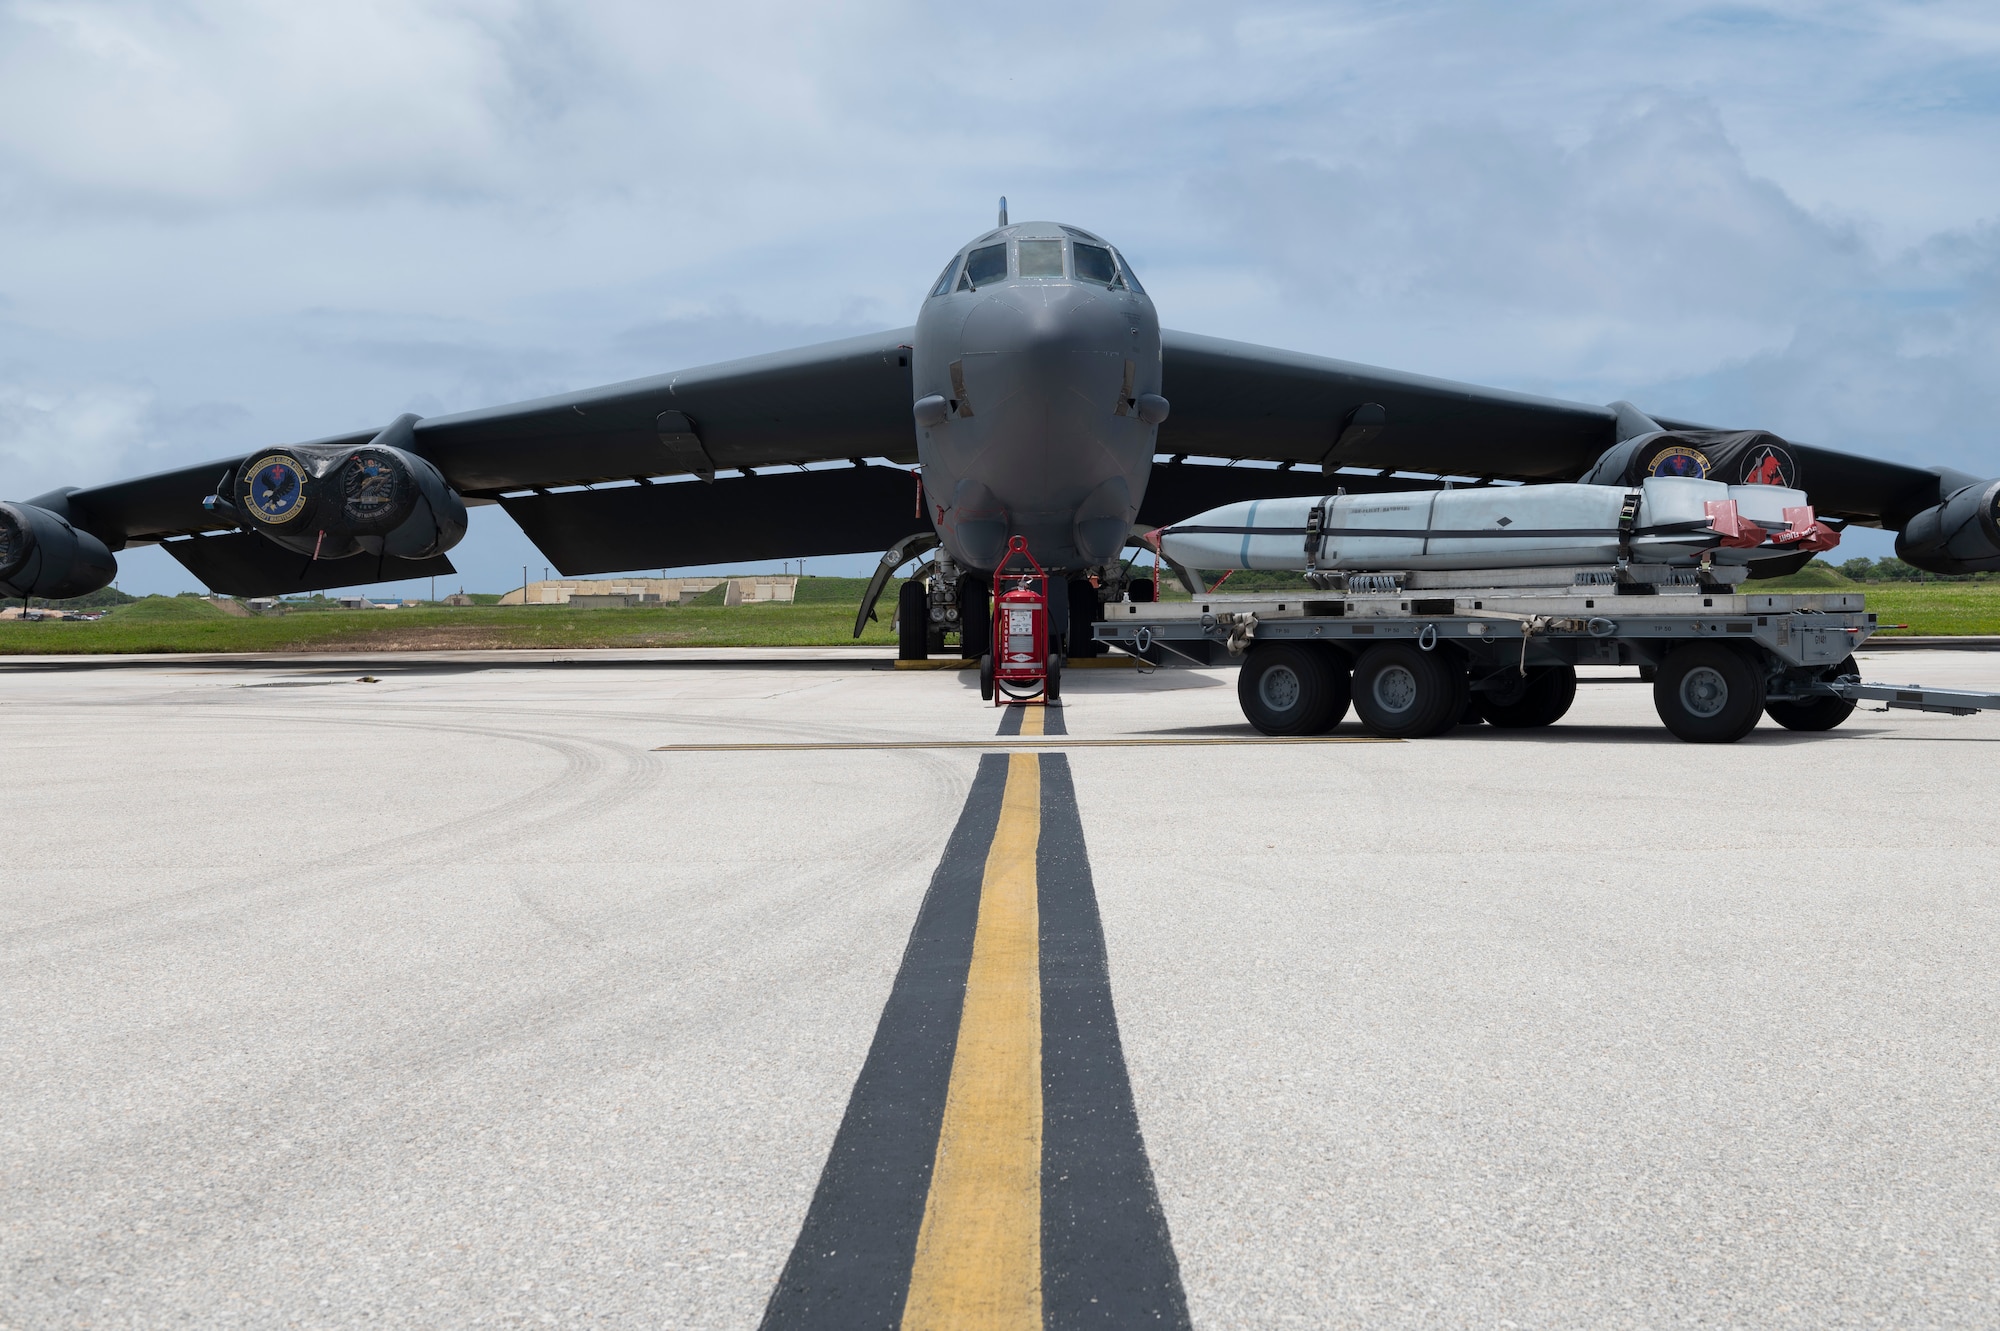 Joint Air to Surface Standoff Missiles are prepared to be loaded on to a U.S. Air Force B-52 Stratofortress on Andersen Air Force Base, Guam, April 24, 2023. The JASSM missile system is a weapons system capable of striking ground targets from extended ranges, making it a key deterrent against aggression across the Pacific. (U.S. Air Force photo by Airman 1st Class Spencer Perkins)